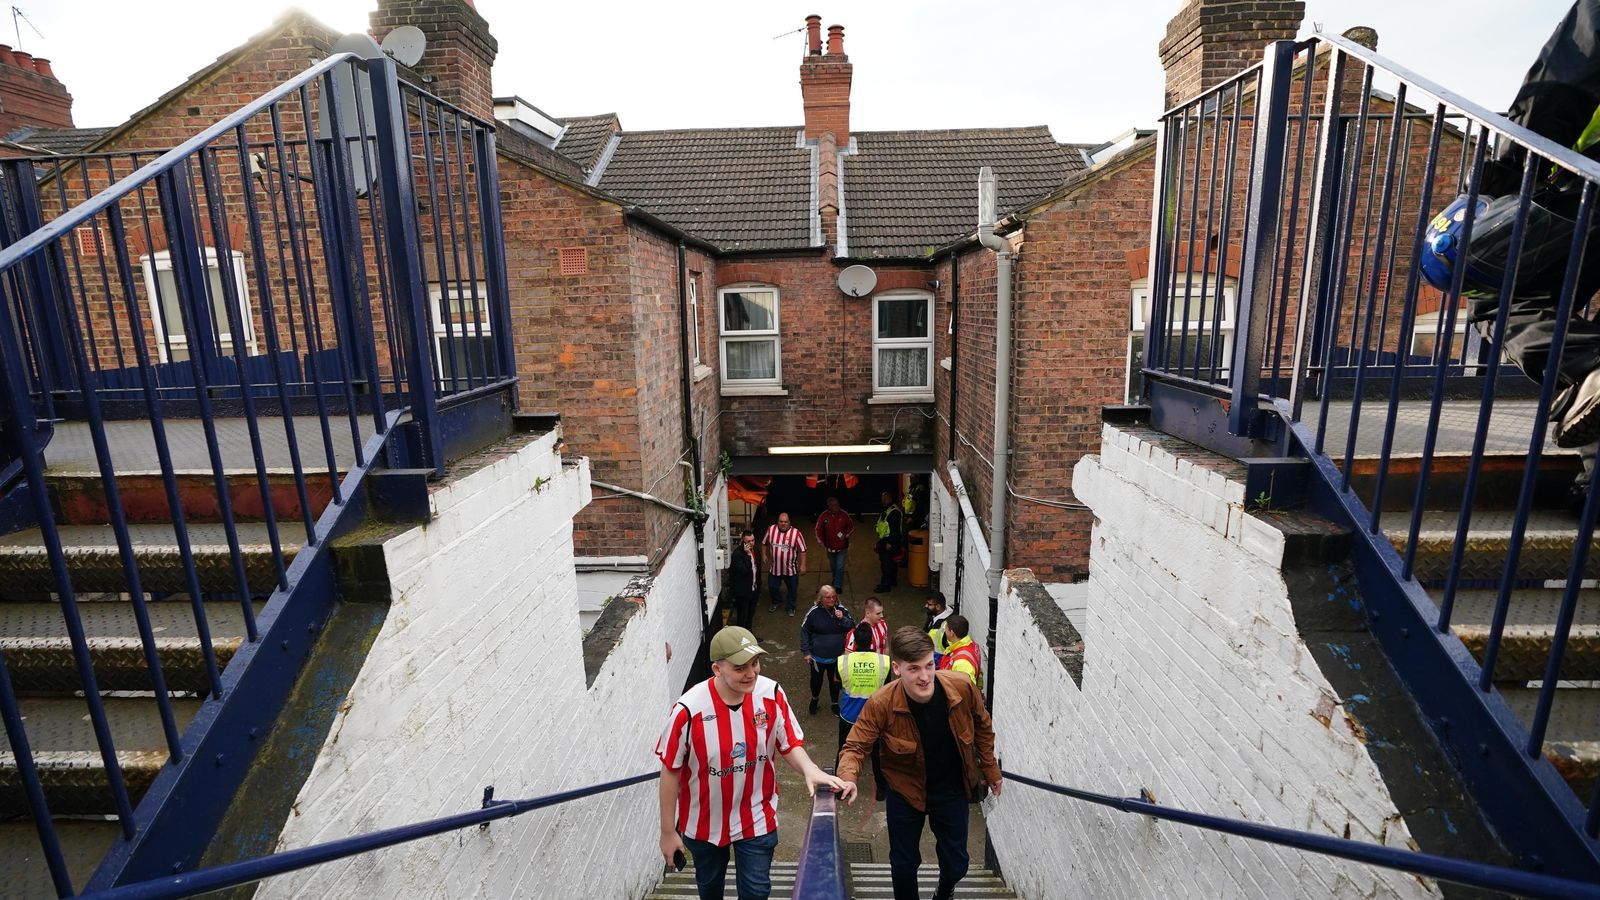 Luton Town: What is next for Kenilworth Road, one of the Premier League's smallest stadiums? 